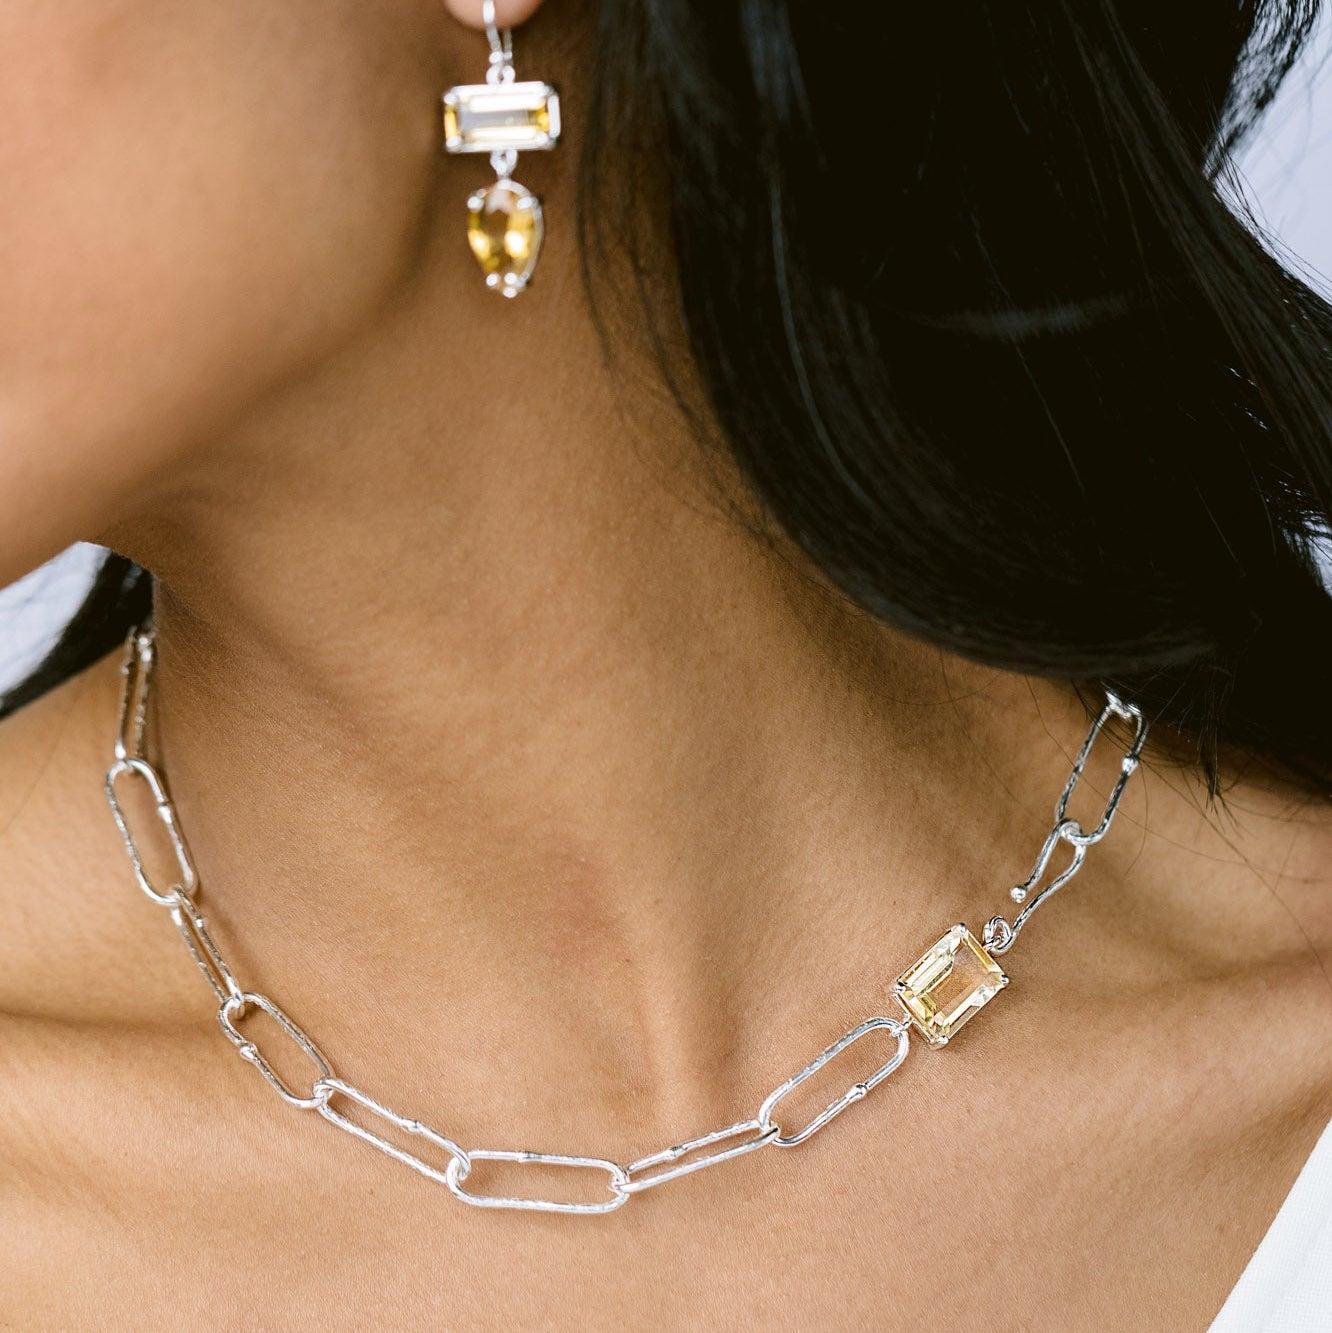 Intention: All Eyes on Me

Design: Multiple simple, understated ideas work well together in this timeless design. From the handcrafted links, to the spinel quartz, to the self closing hook, it's hard to tell where the beauty of this choker begins